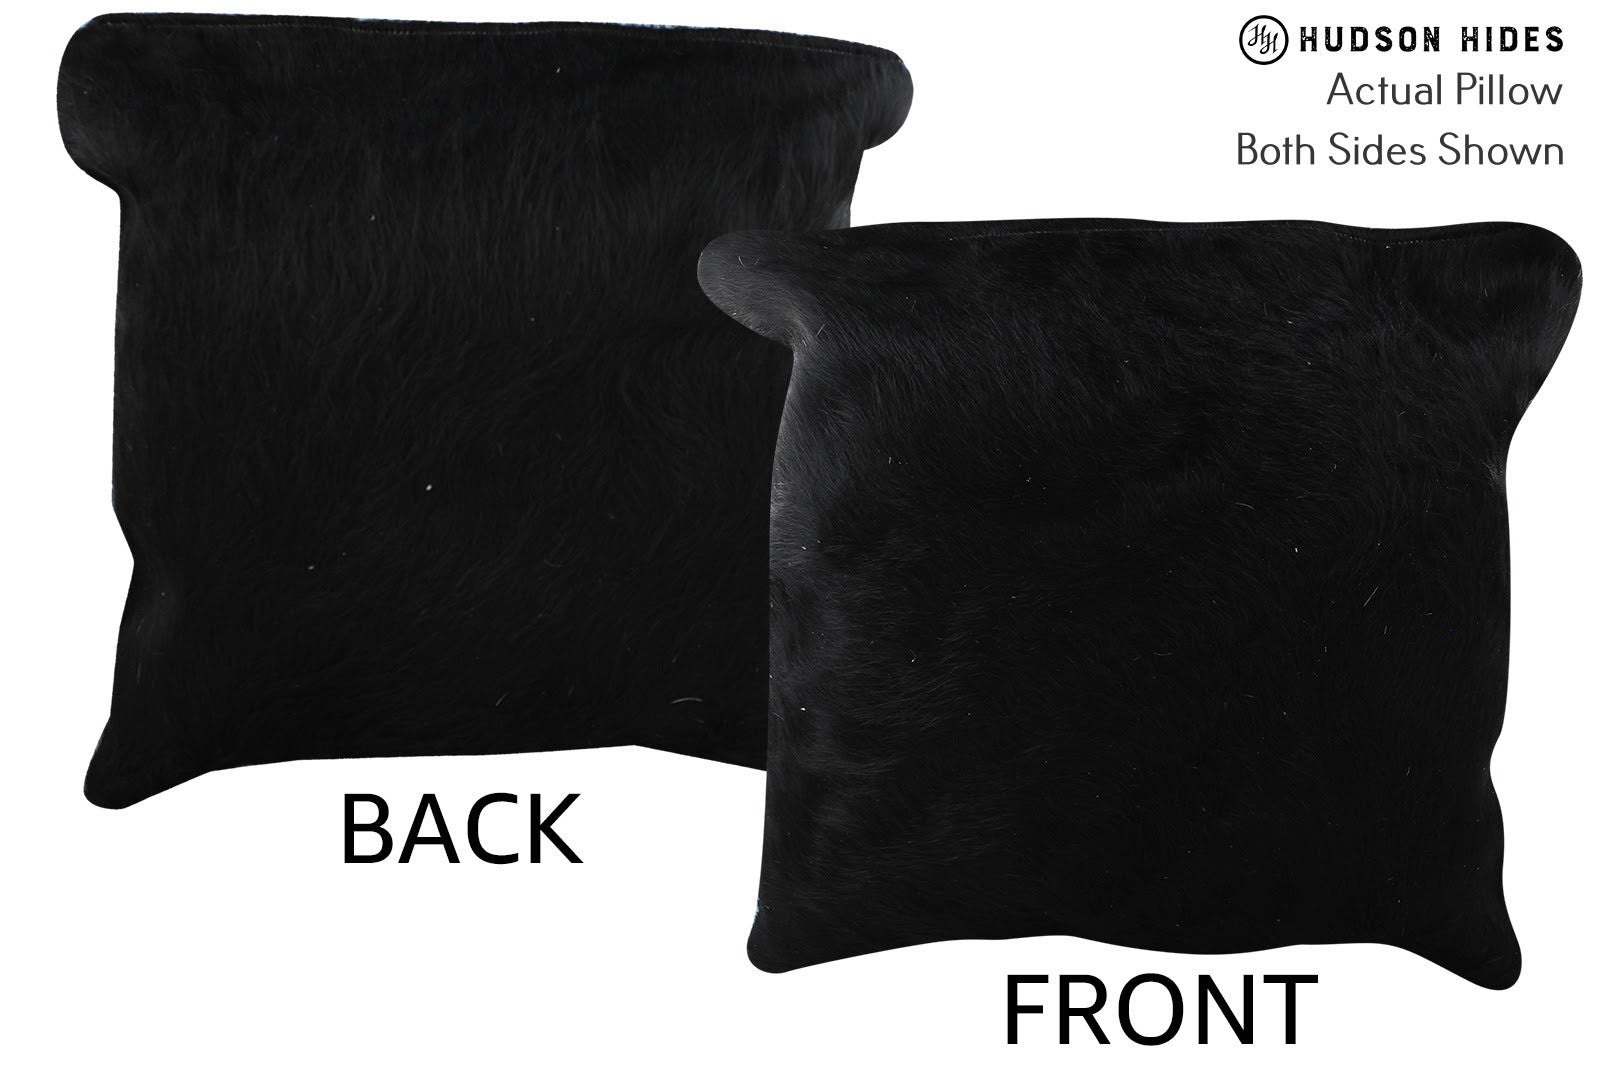 Solid Black Cowhide Pillow #76088